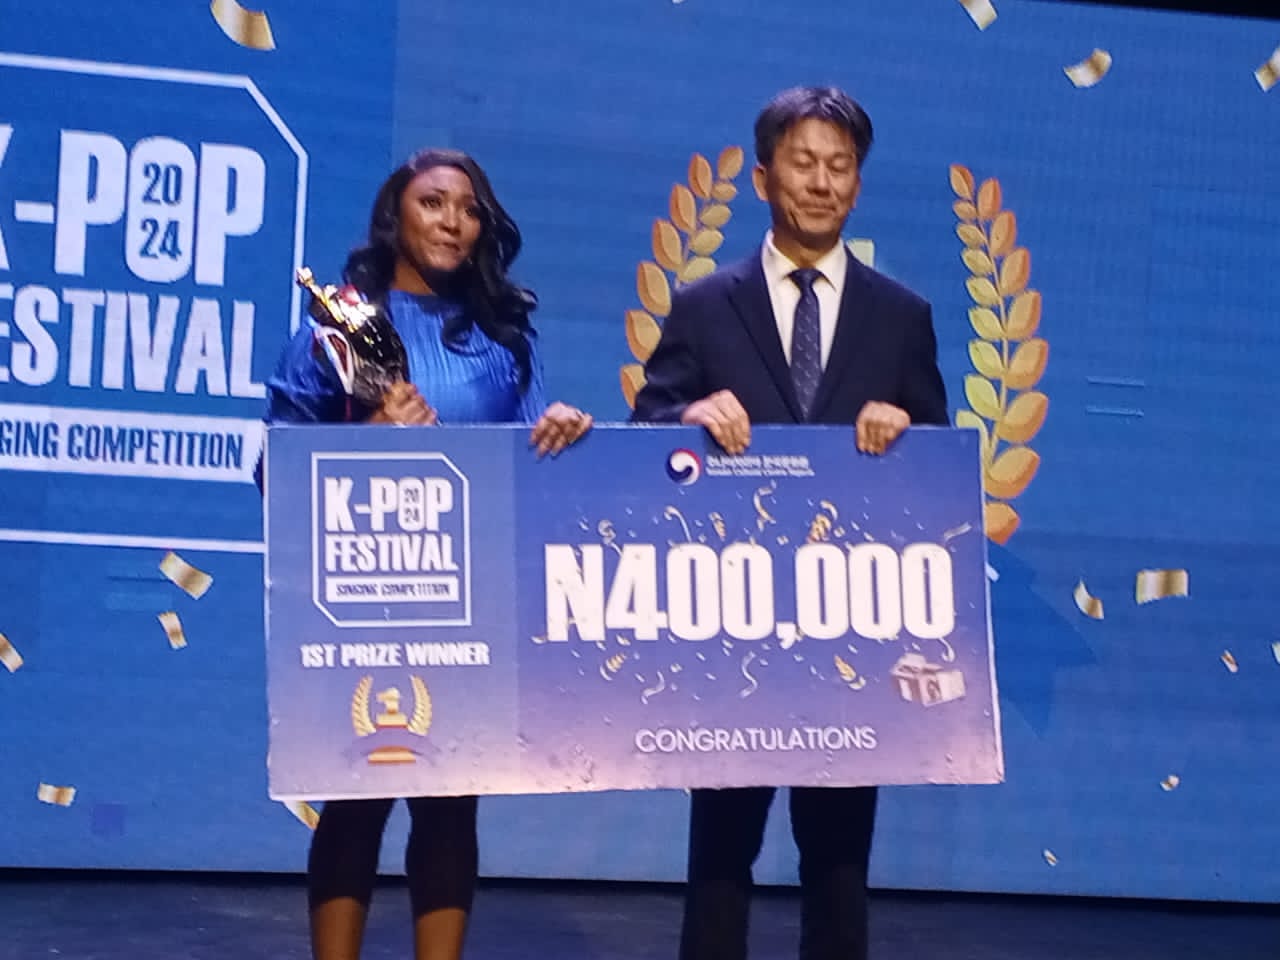 KCCN festival 2024 completition XMOP 5-man won with seven hundred thousand cash prize in Lagos By Ifeoma Ikem